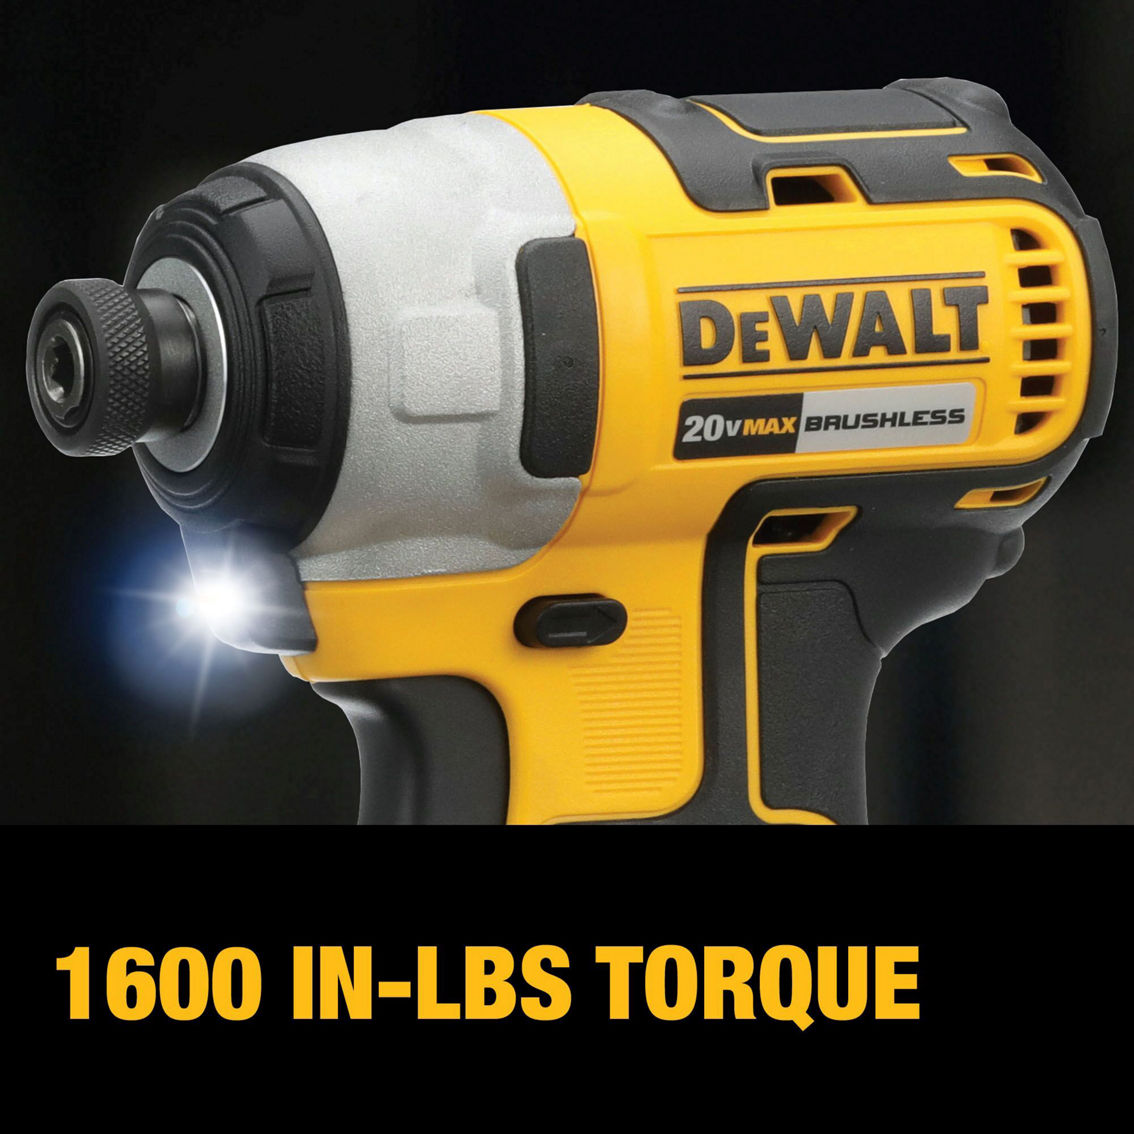 DeWalt 20V MAX 1.5 Ah Lithium Ion Compact Brushless Drill and Impact Driver Kit - Image 4 of 4